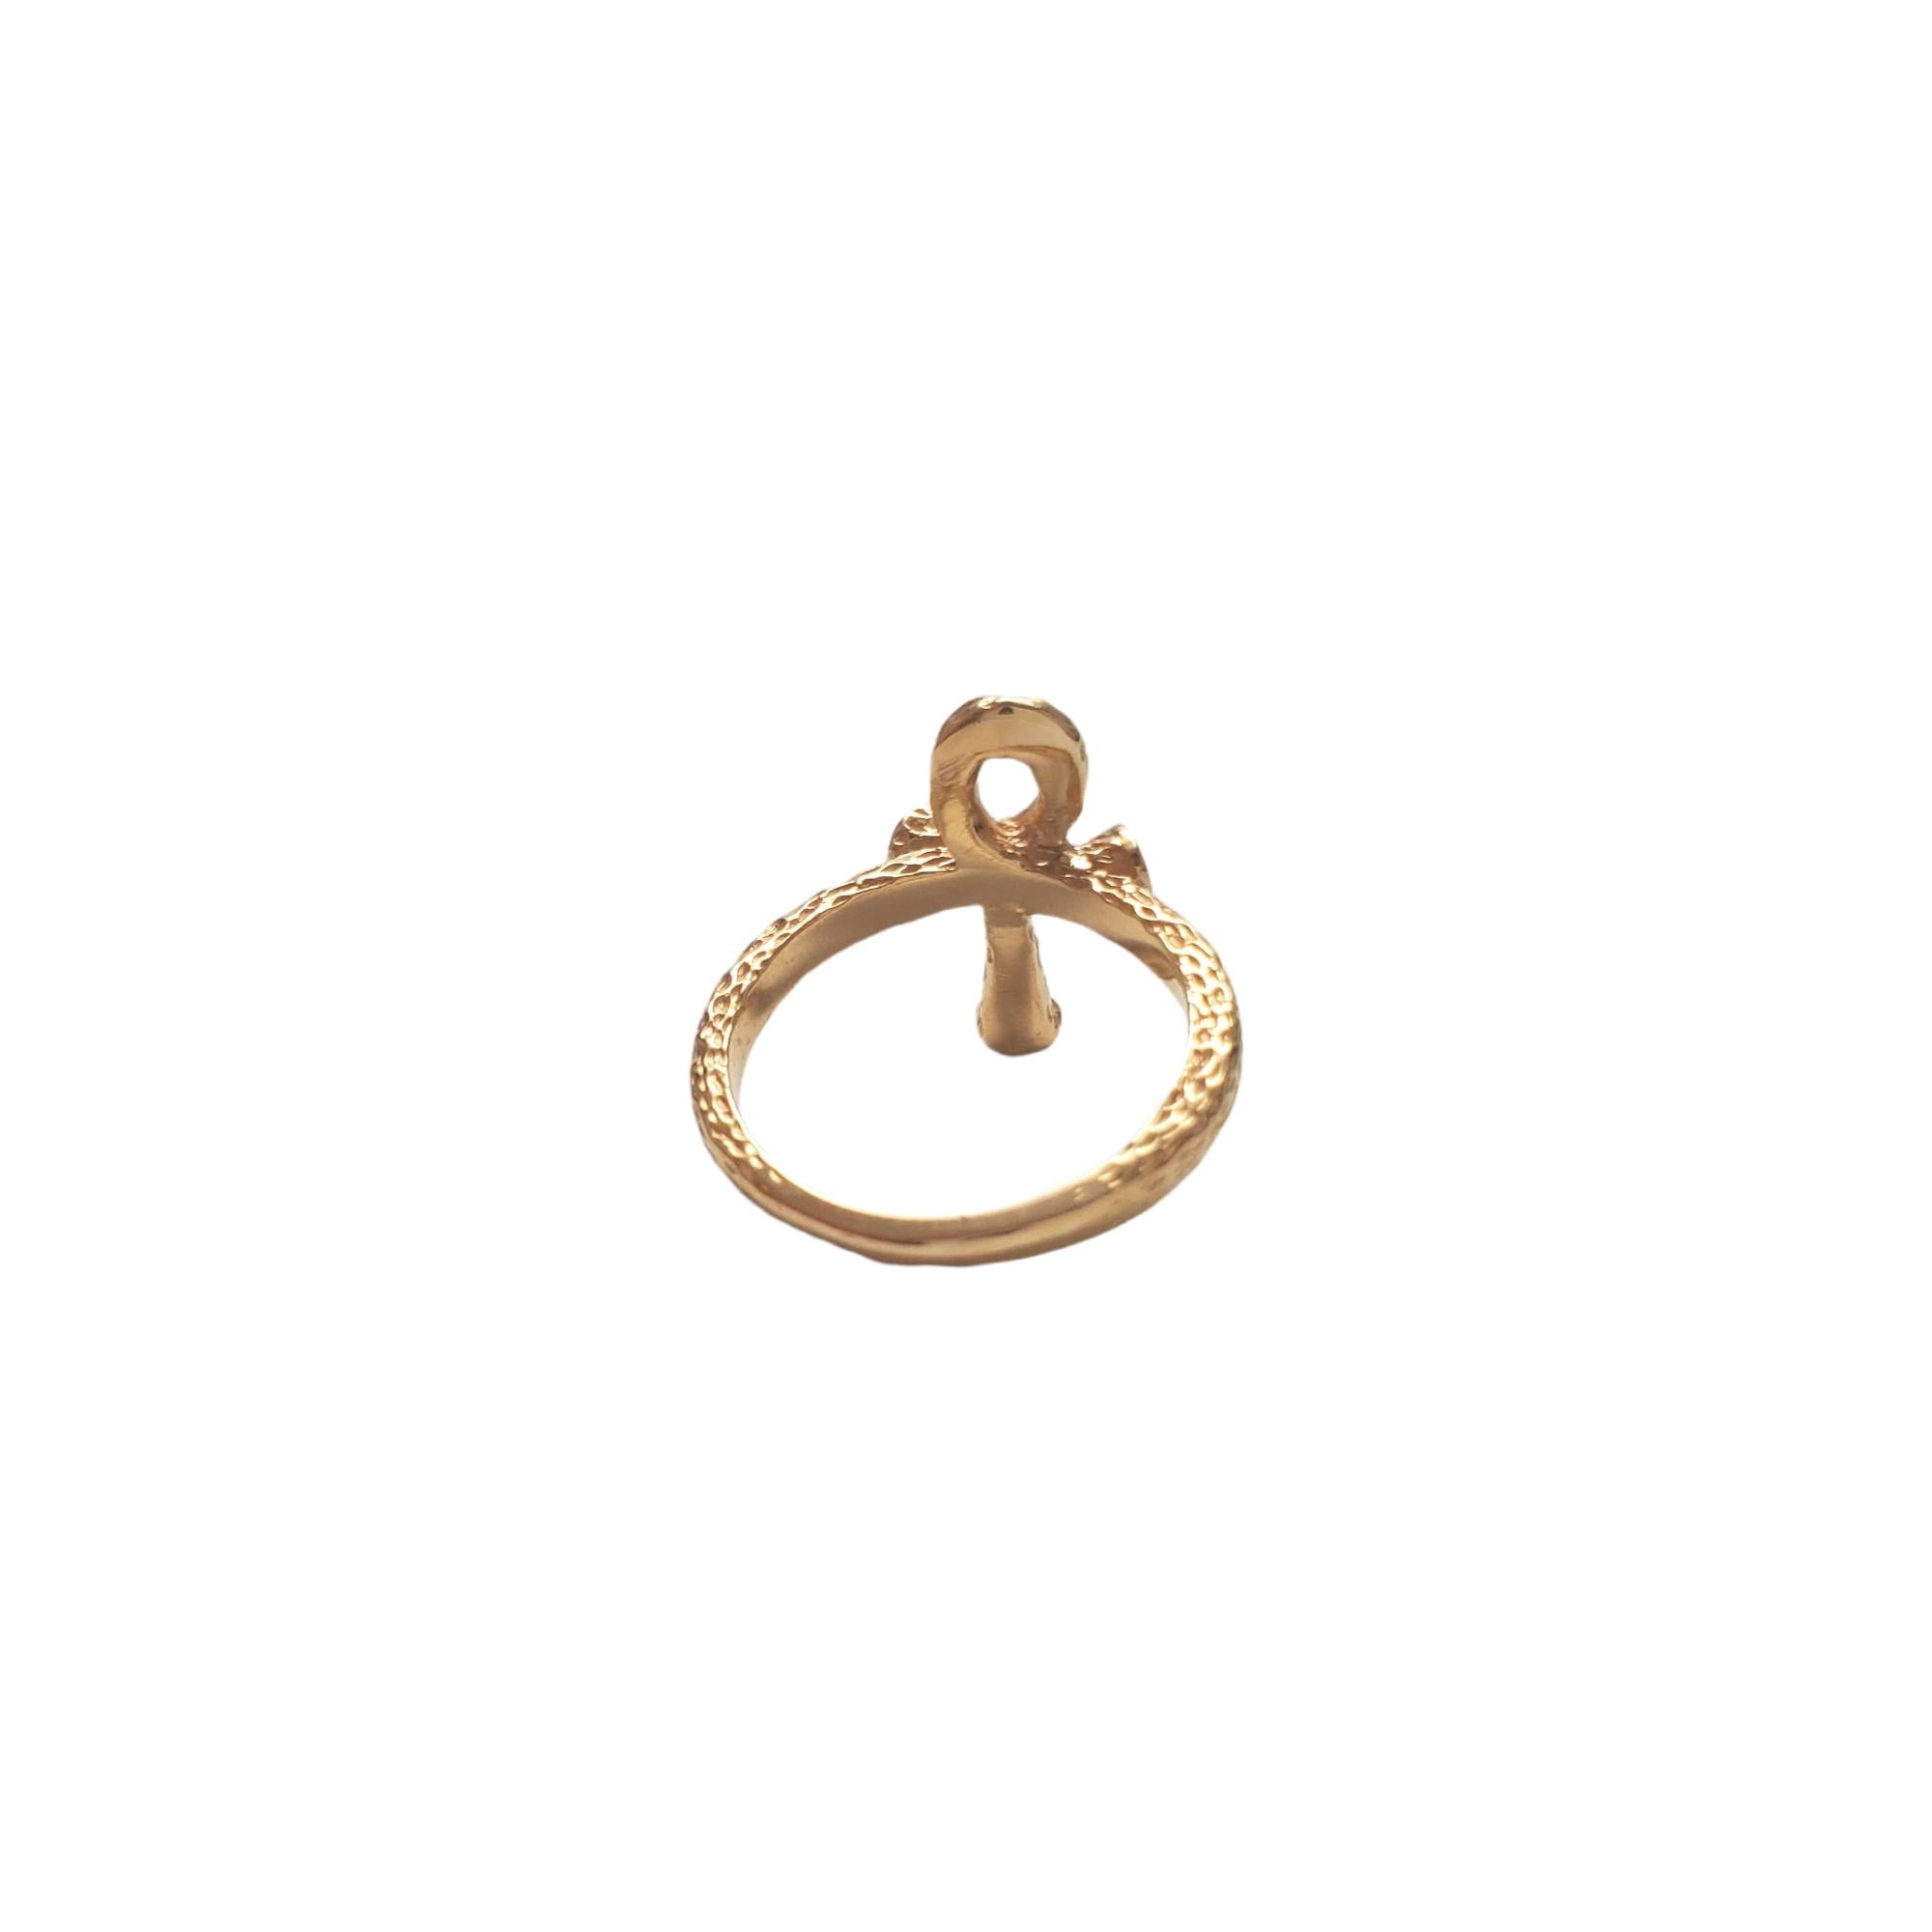 10K Yellow Gold Ankh Ring 

Ankh symbol is considered the key of life

Beautiful vintage 10K yellow gold Ankh ring!

Size: 2.61mm X 20.03mm

Weight:  3.5gr /  2.2dwt

Size 5.75

Hallmark: B & F 10K

Very good condition, professionally